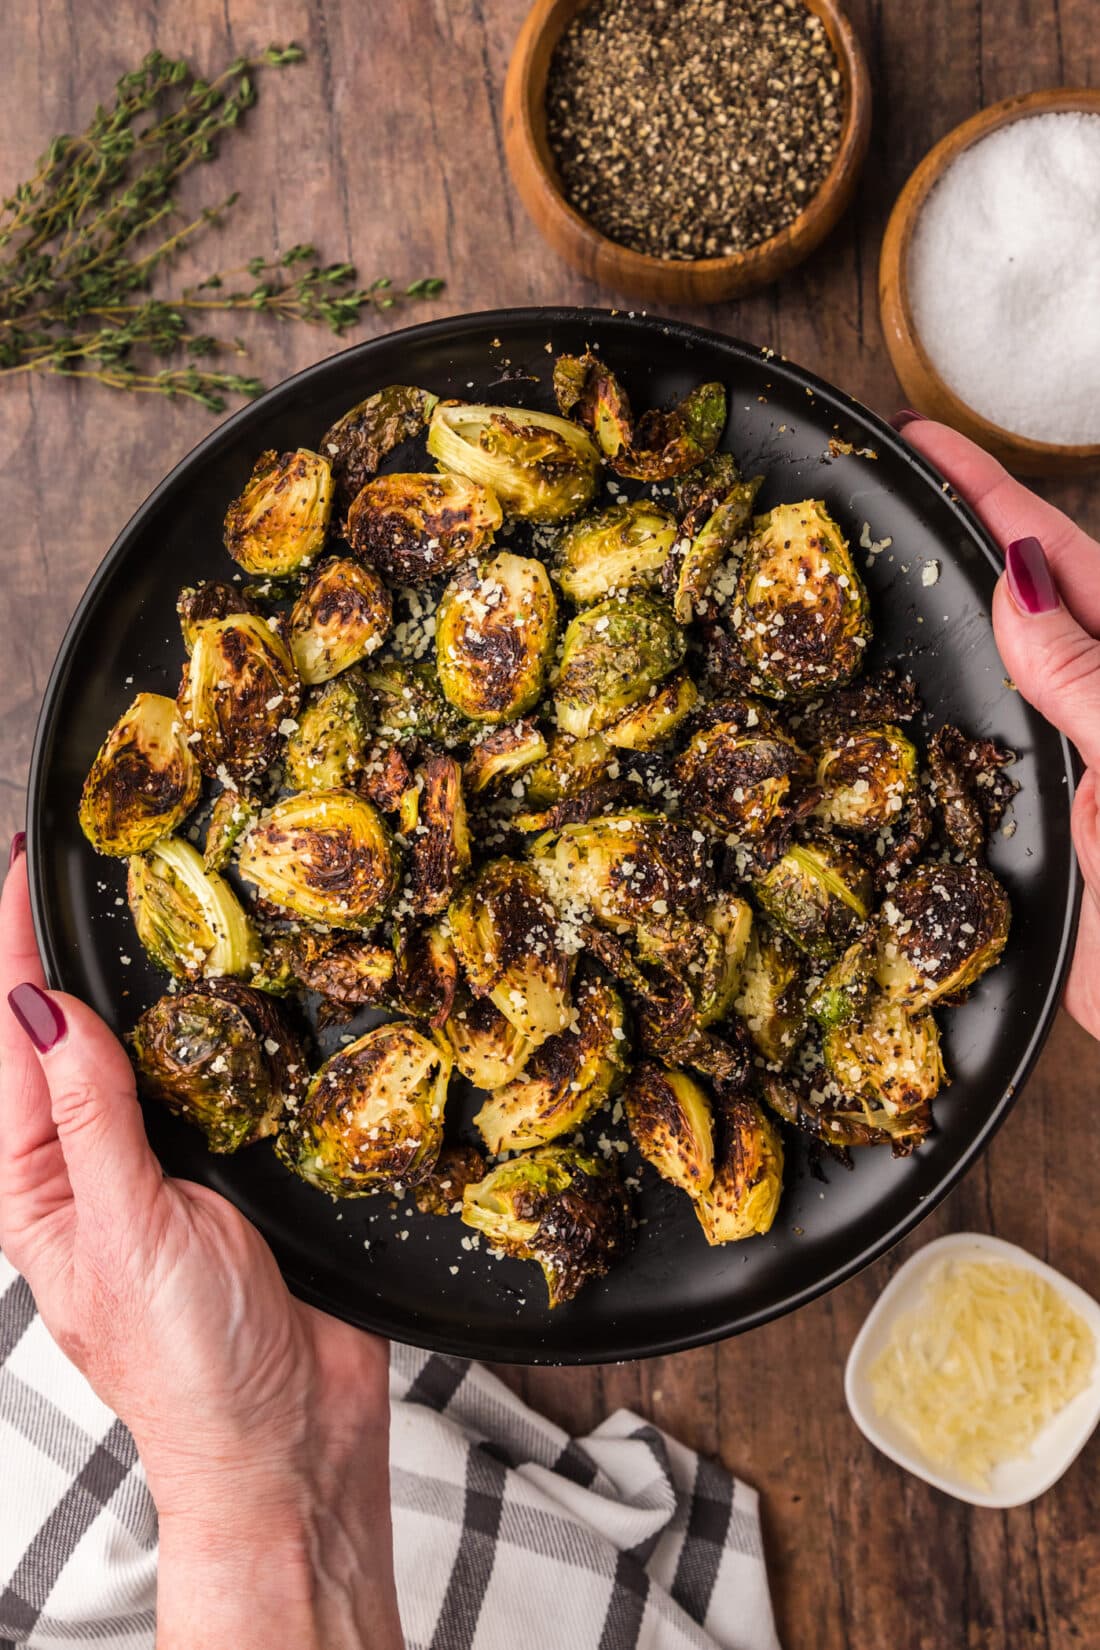 Hands holding a plate of Roasted Brussel Sprouts topped with parmesan